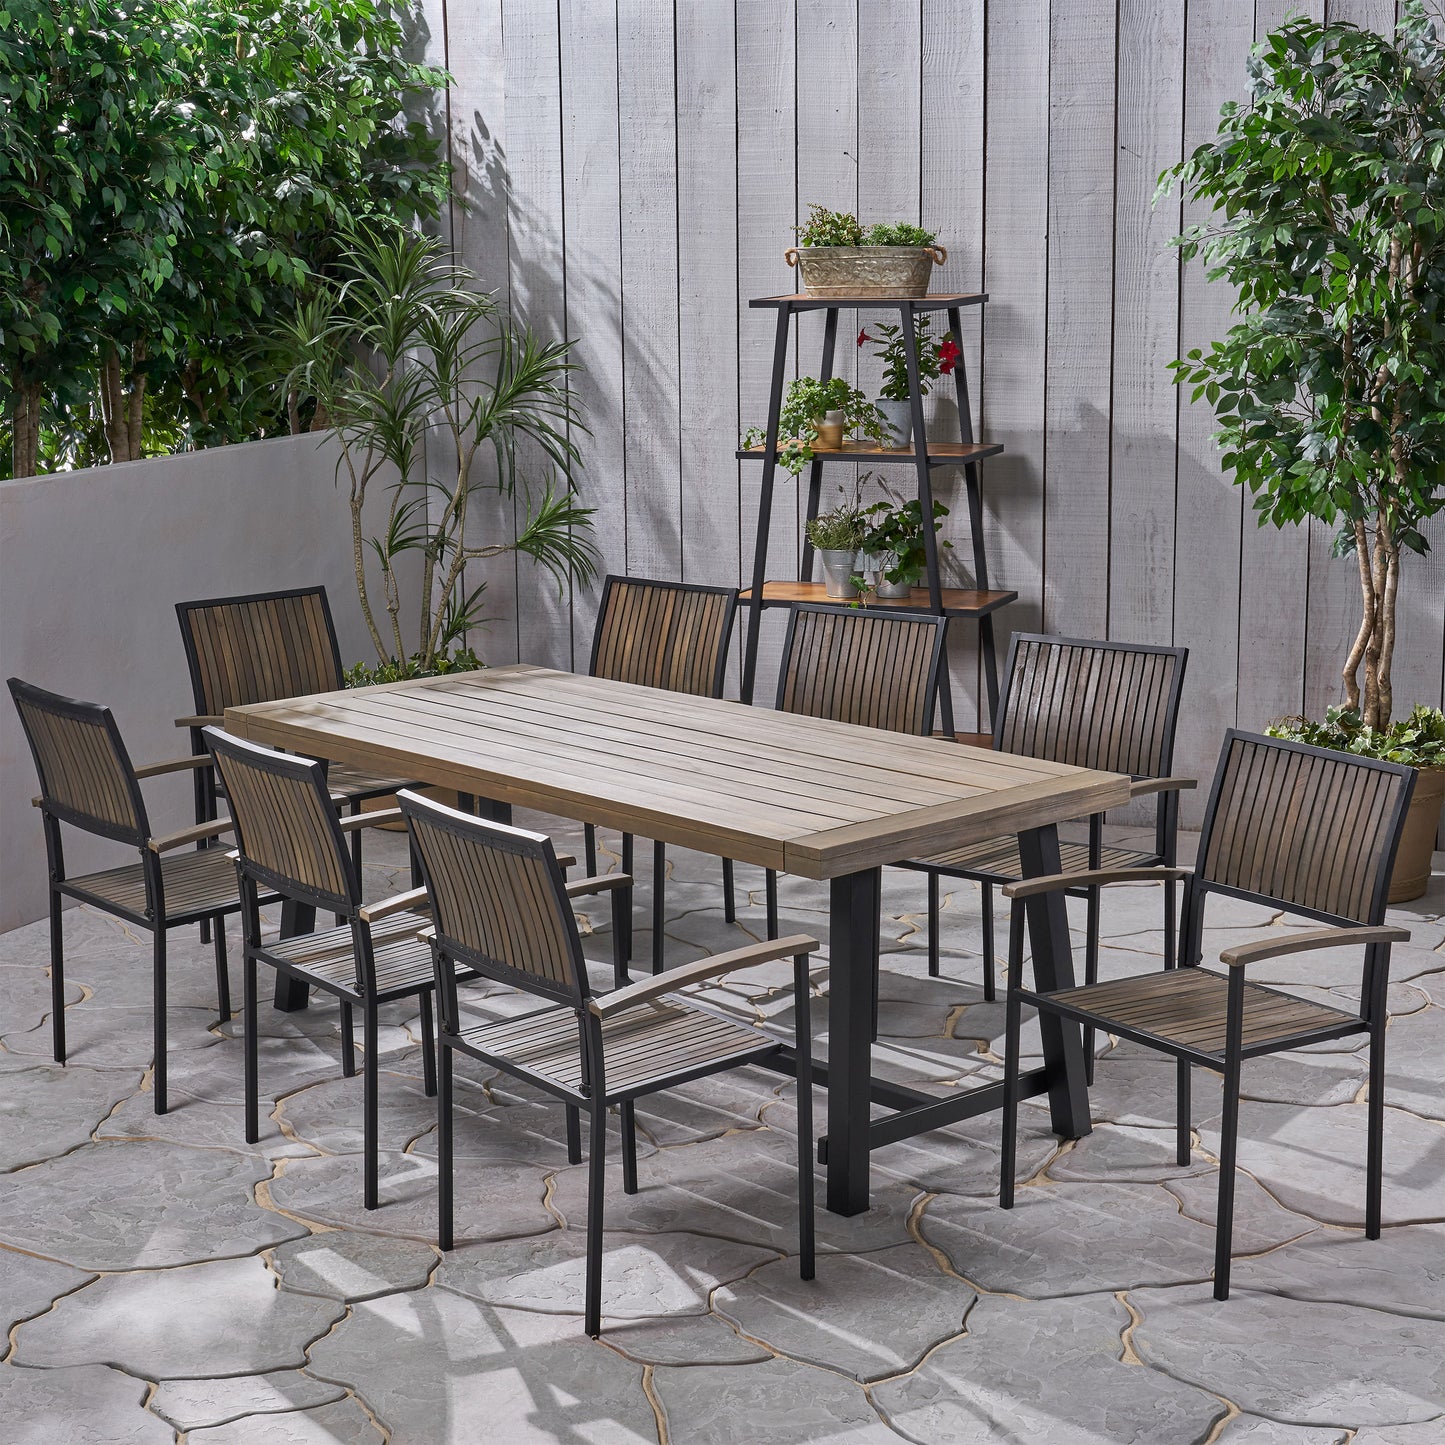 Cherry Outdoor Acacia Wood 8 Seater Dining Set